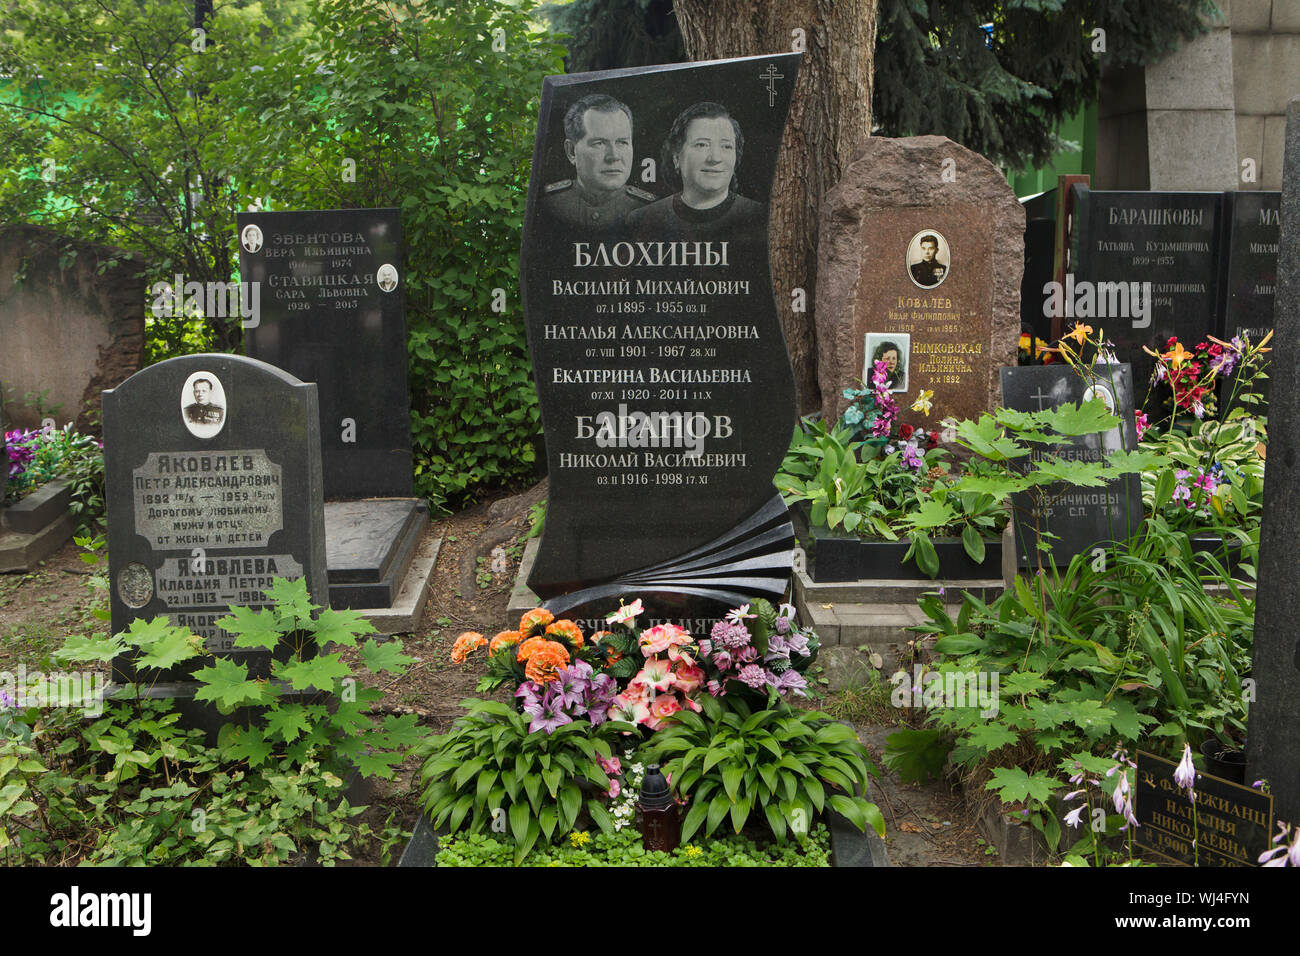 grave-of-soviet-general-vasily-blokhin-1895-1955-and-his-relatives-at-the-donskoye-cemetery-in-moscow-russia-vasily-blokhin-was-the-chief-executioner-of-the-nkvd-during-the-great-terror-he-obviously-personally-executed-russian-writer-isaac-babel-russian-theatre-director-vsevolod-meyerhold-soviet-military-commander-mikhail-tukhachevsky-and-many-others-WJ4FYN.jpg